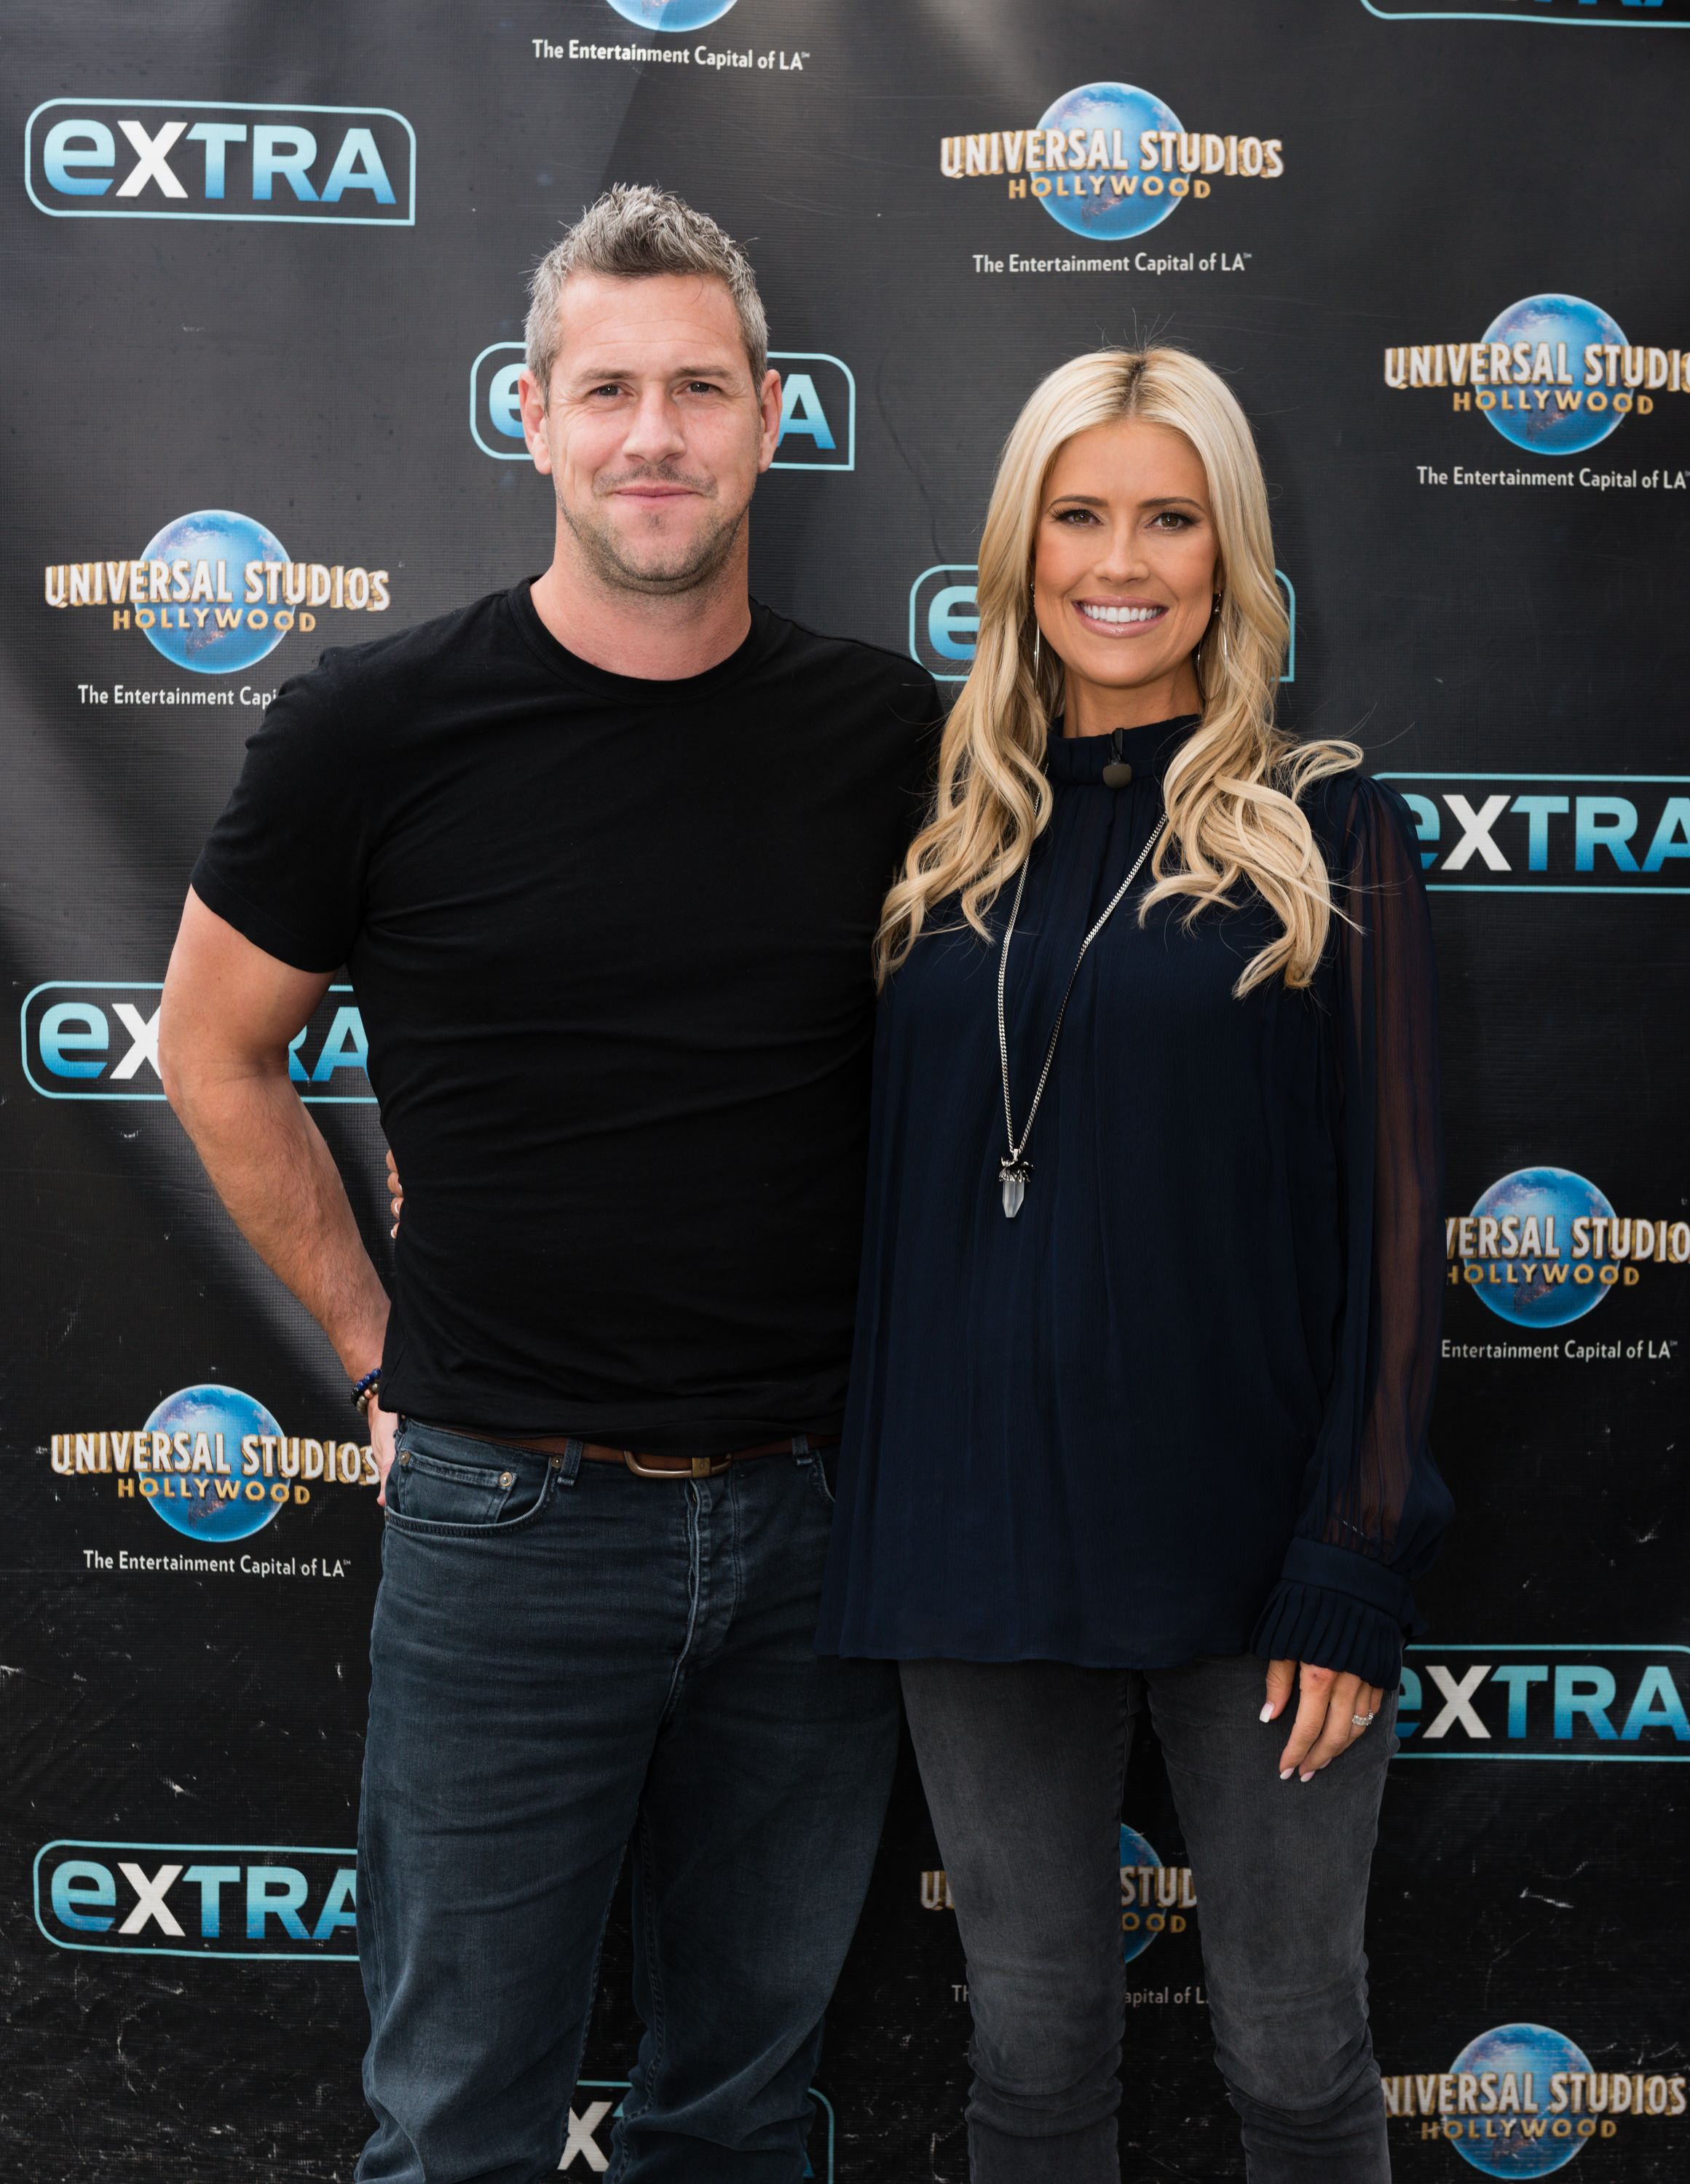 Christina Anstead and Ant Anstead at Universal Studios Hollywood in 2019 | Source: Getty Images